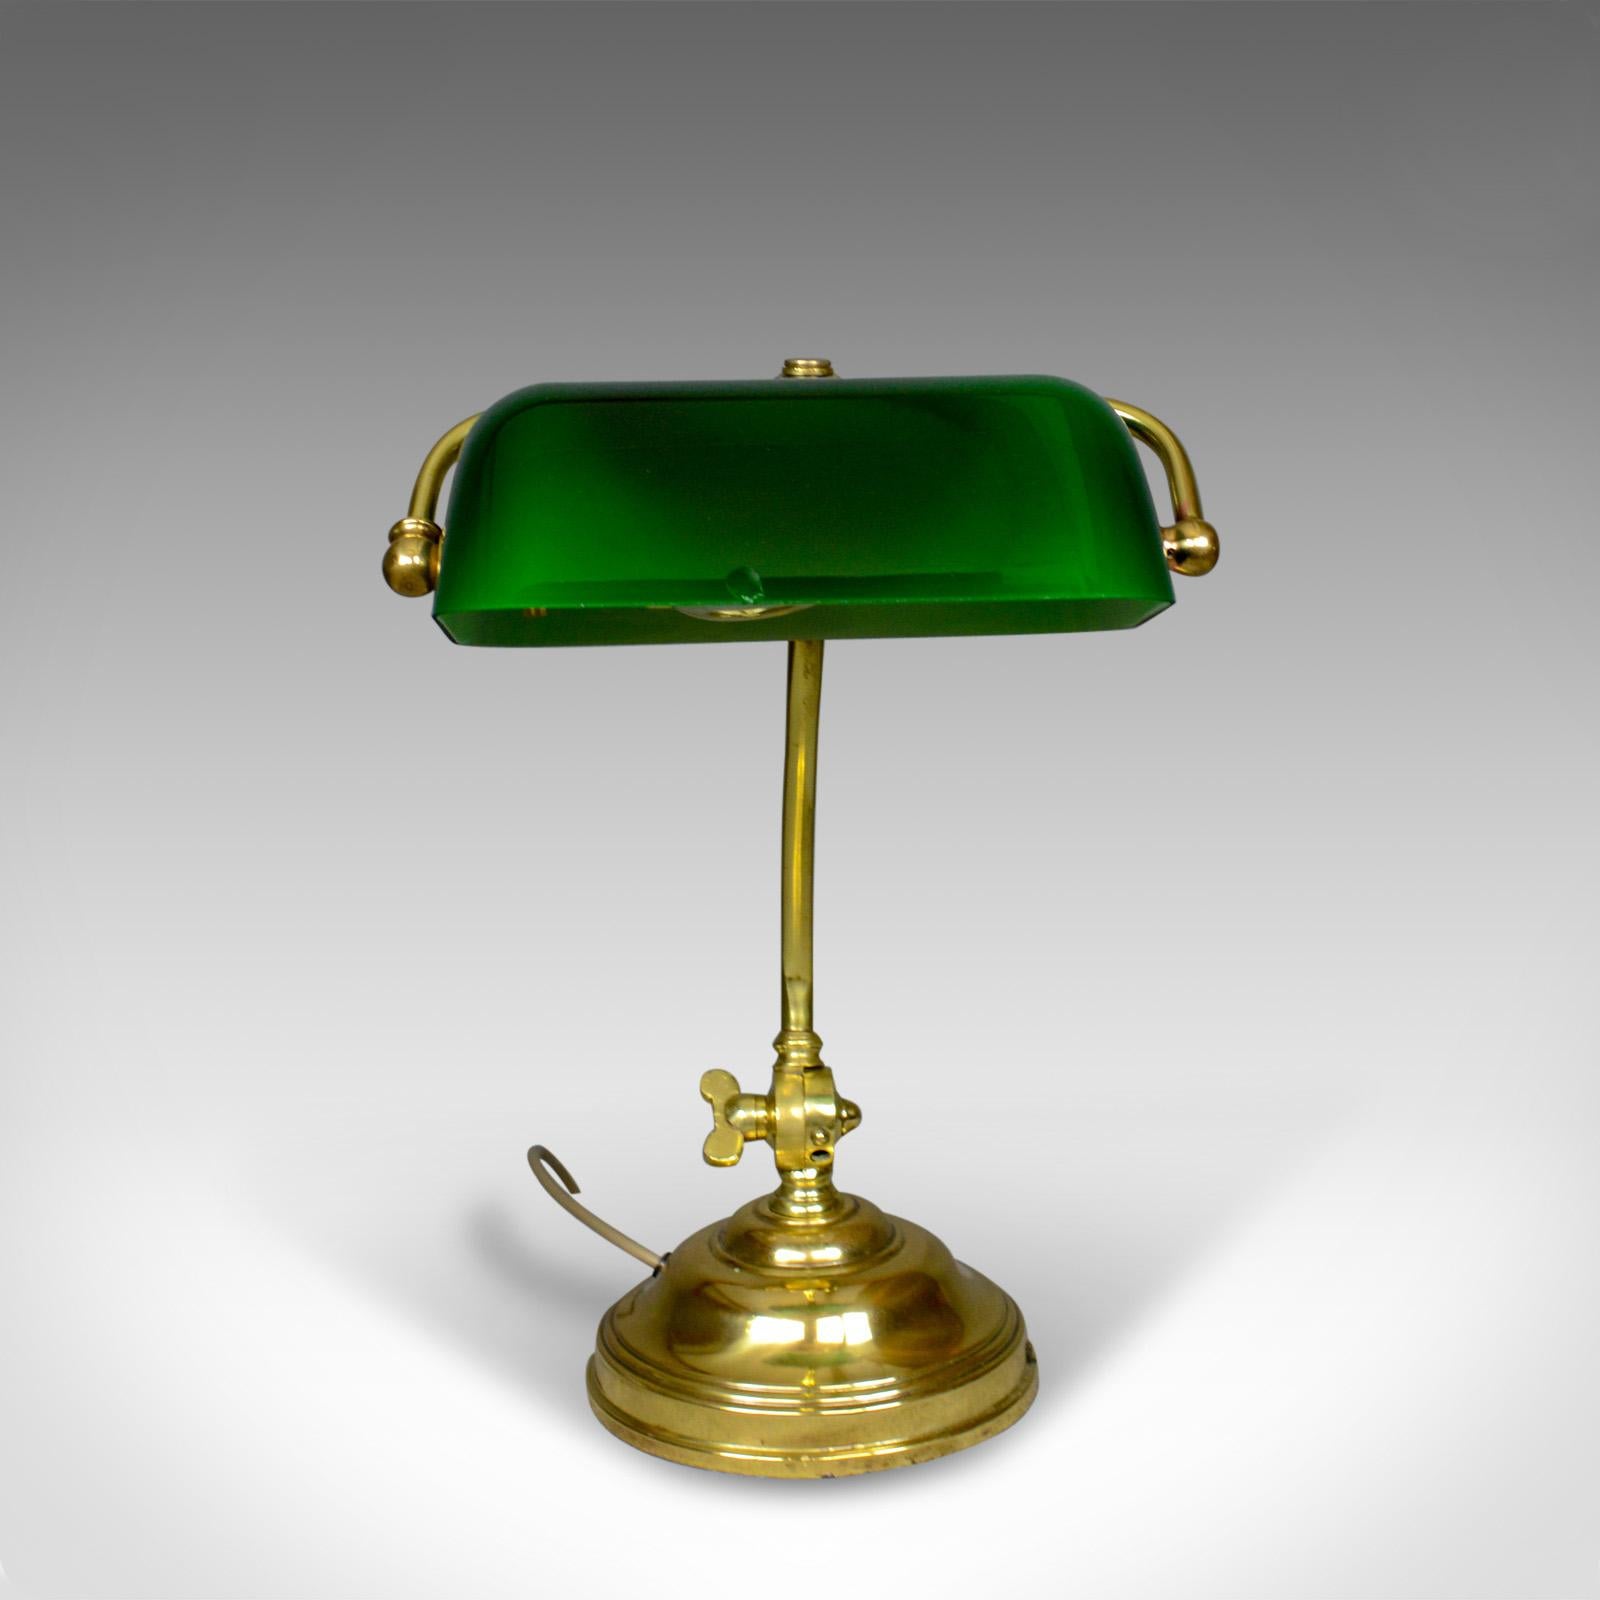 This is an antique barrister's desk lamp. A heavy, English, brass and glass lamp dating to the Edwardian period of the early 20th century, circa 1910.

Classic barristers desk lamp
Adjustable dark green glass shade
Minor chip to front edge of